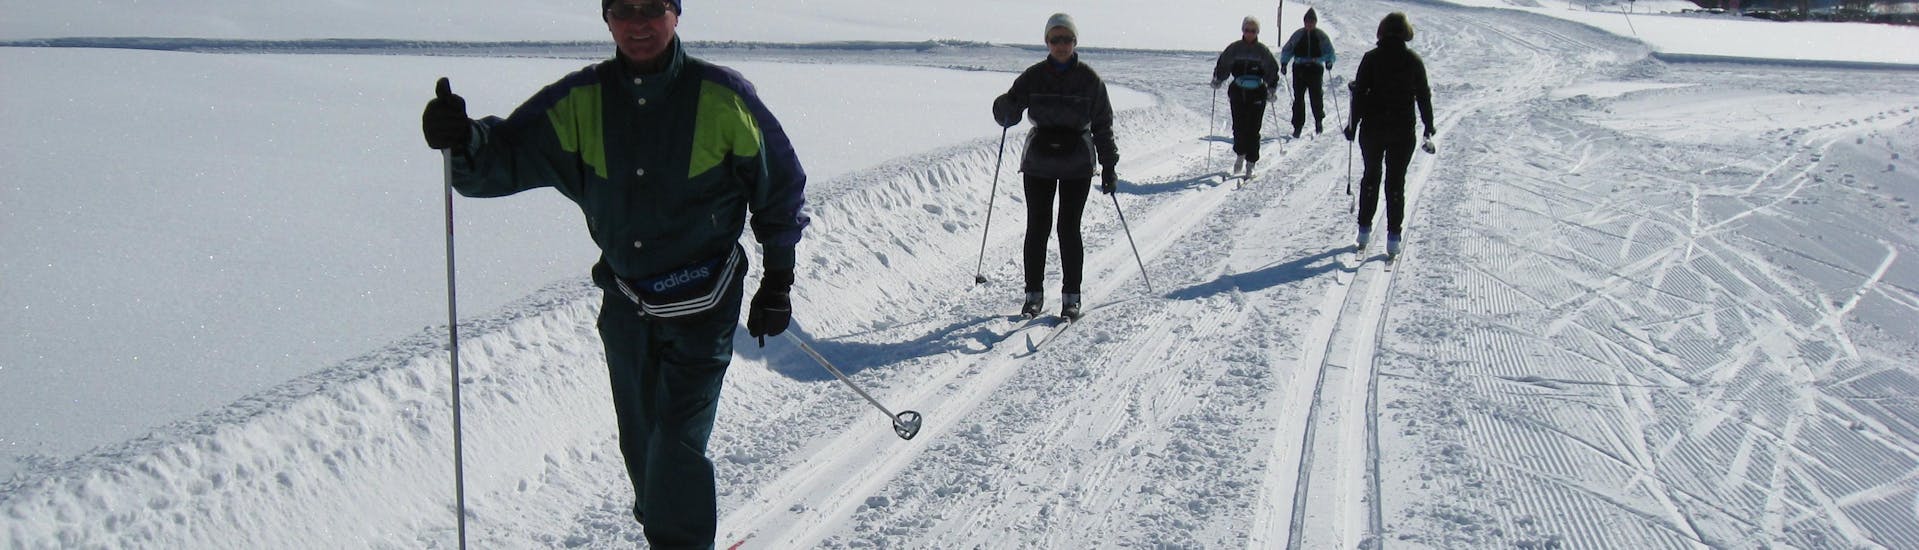 Adults cross country skiing at Private Cross Country Skiing Lessons for All Levels from Ski & Snowboard School Ostrachtal.